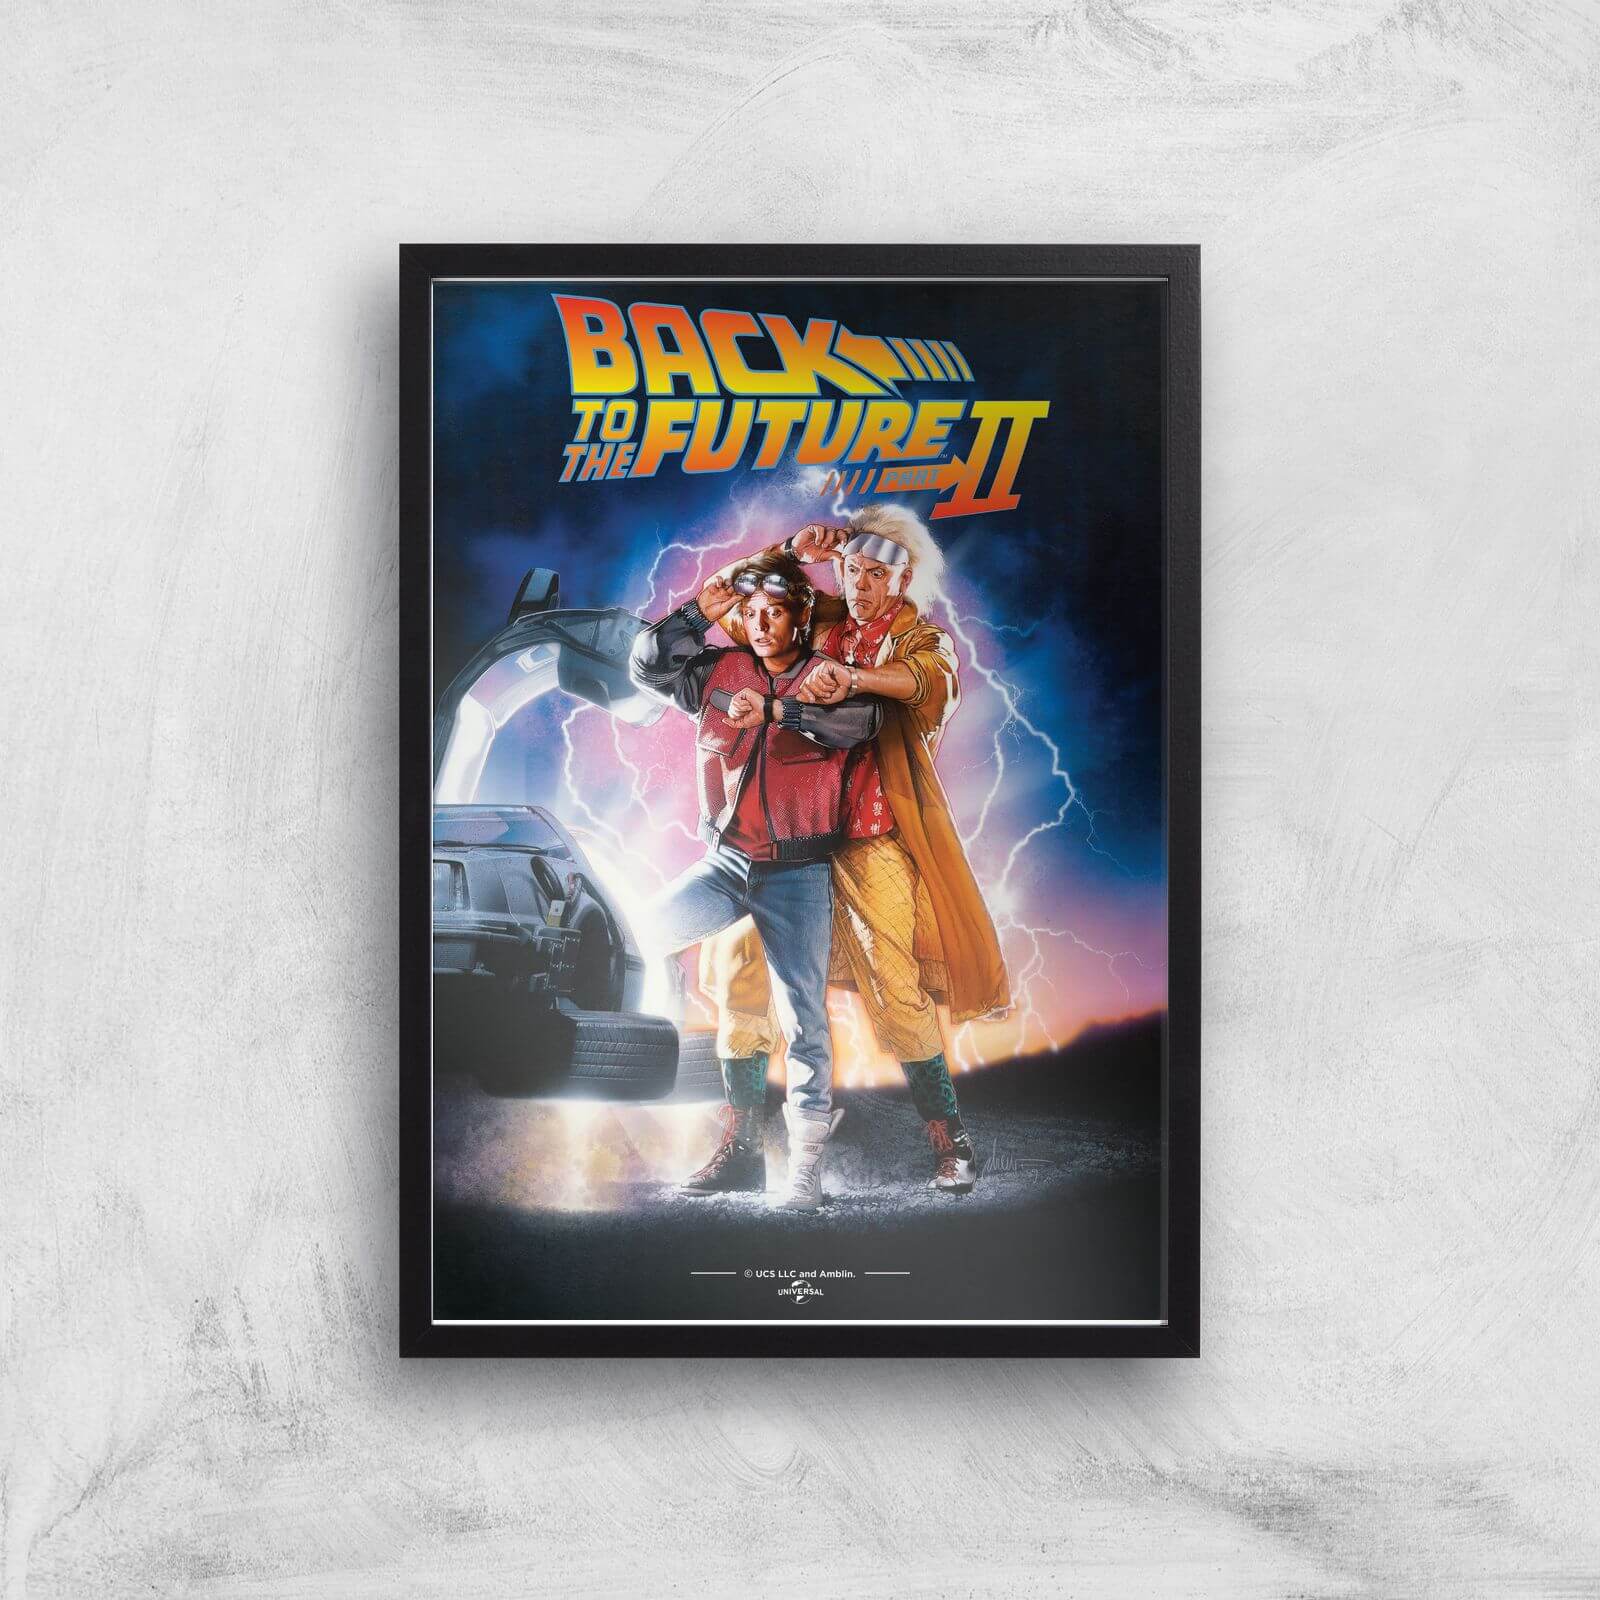 Back To The Future Part 2 Giclee Art Print - A2 - Black Frame